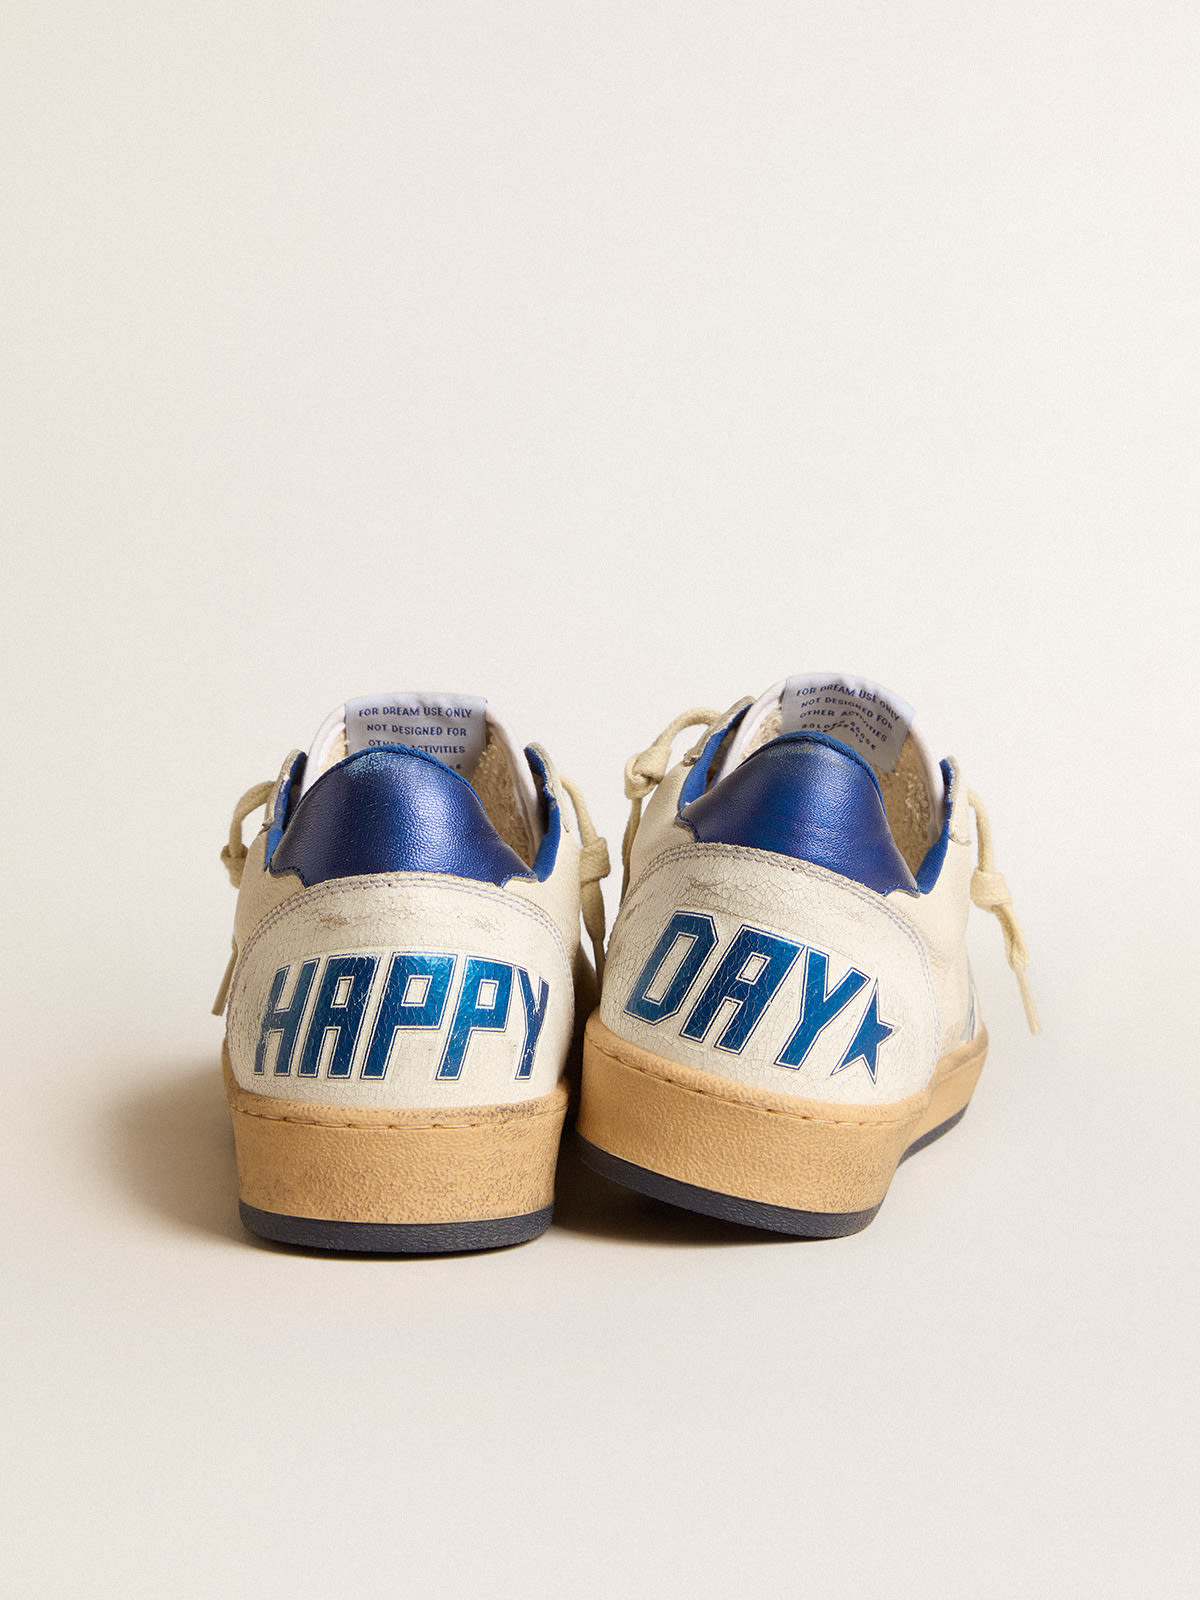 Golden Goose - Men's Ball Star Wishes in white nappa leather with a bright blue star and heel tab in 